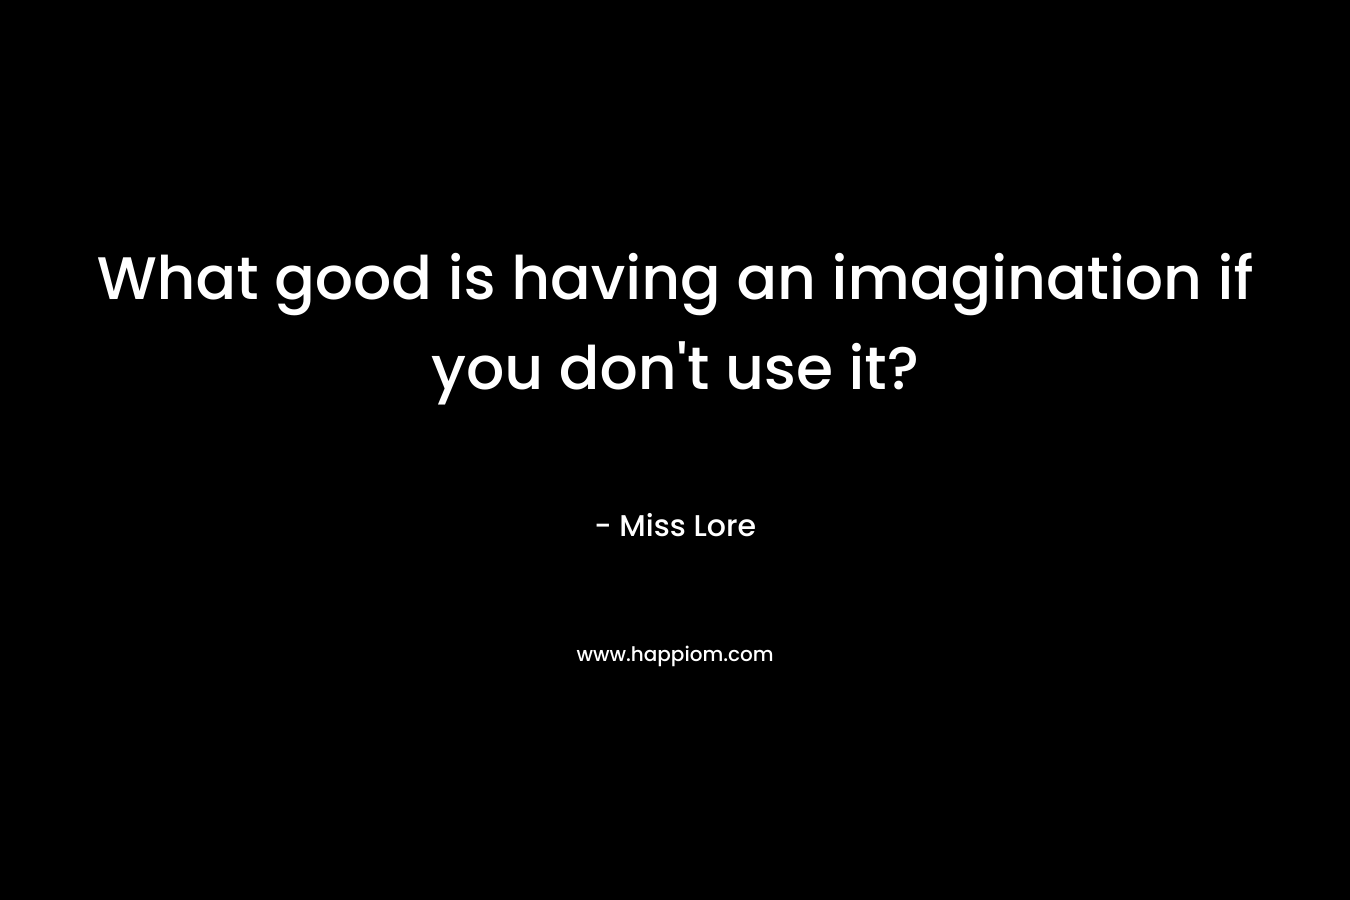 What good is having an imagination if you don't use it?